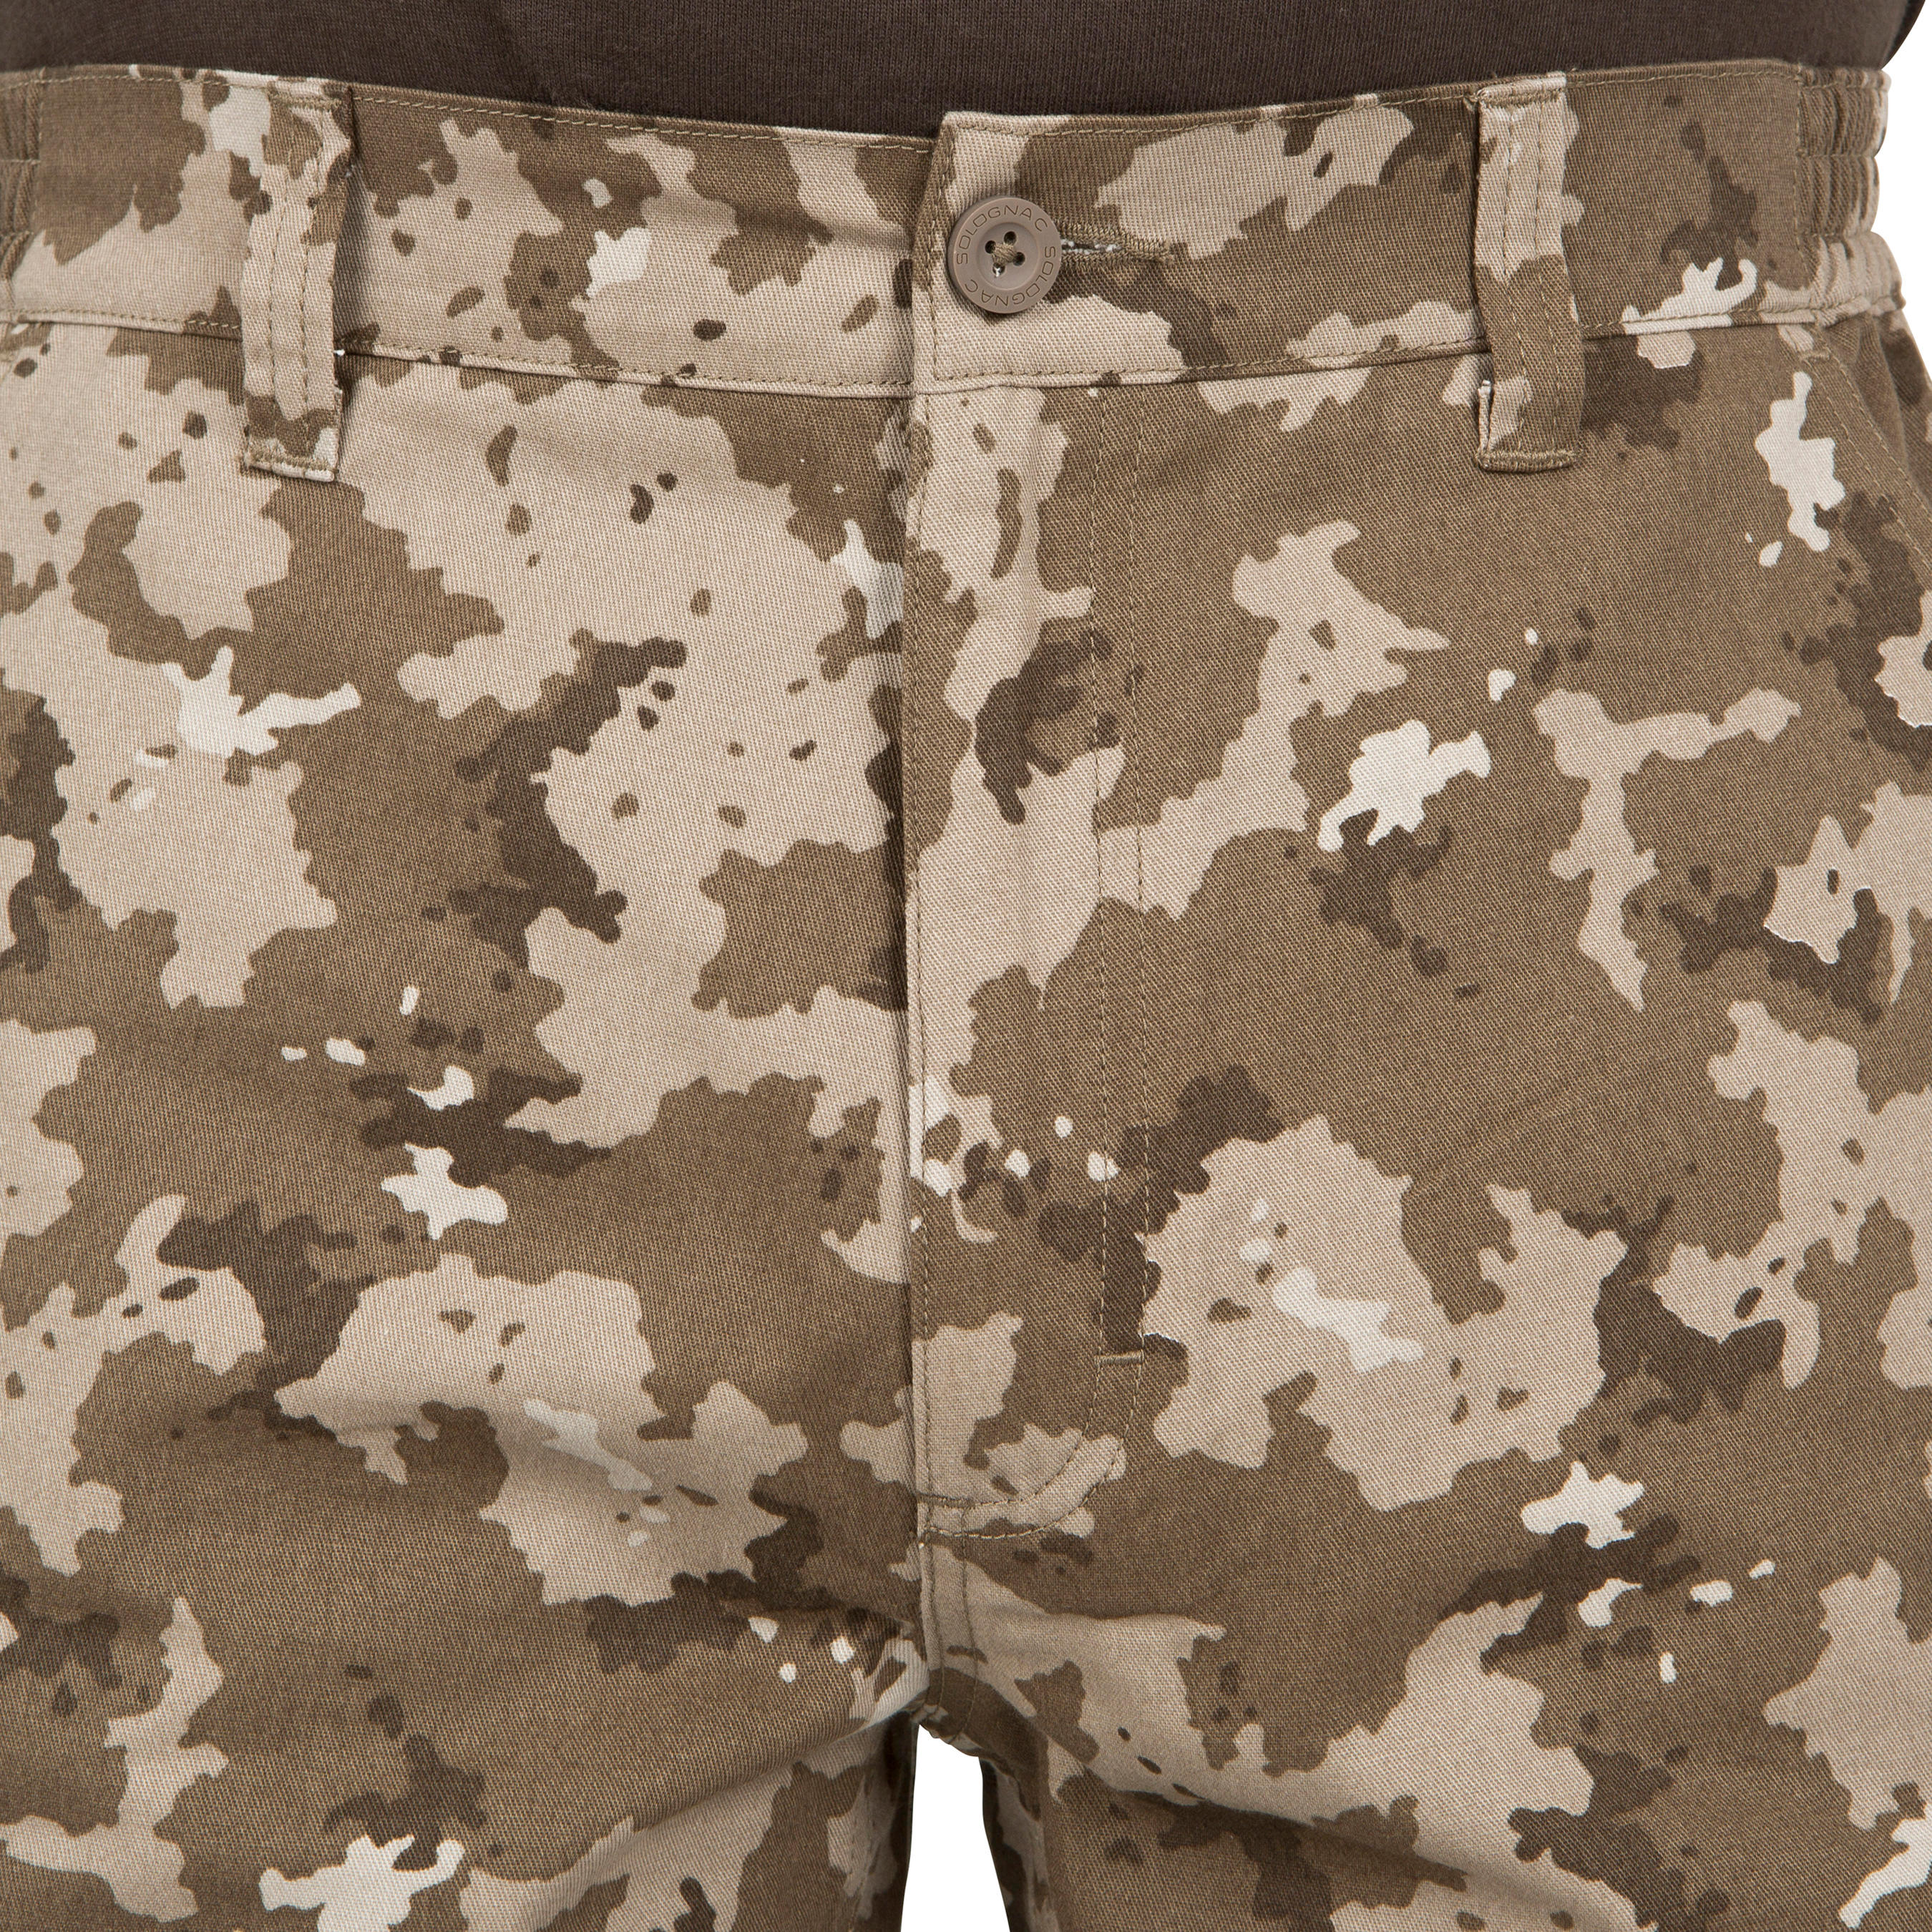 Army Cargo Pant Shorts  Buy Army Cargo Pant Shorts online in India